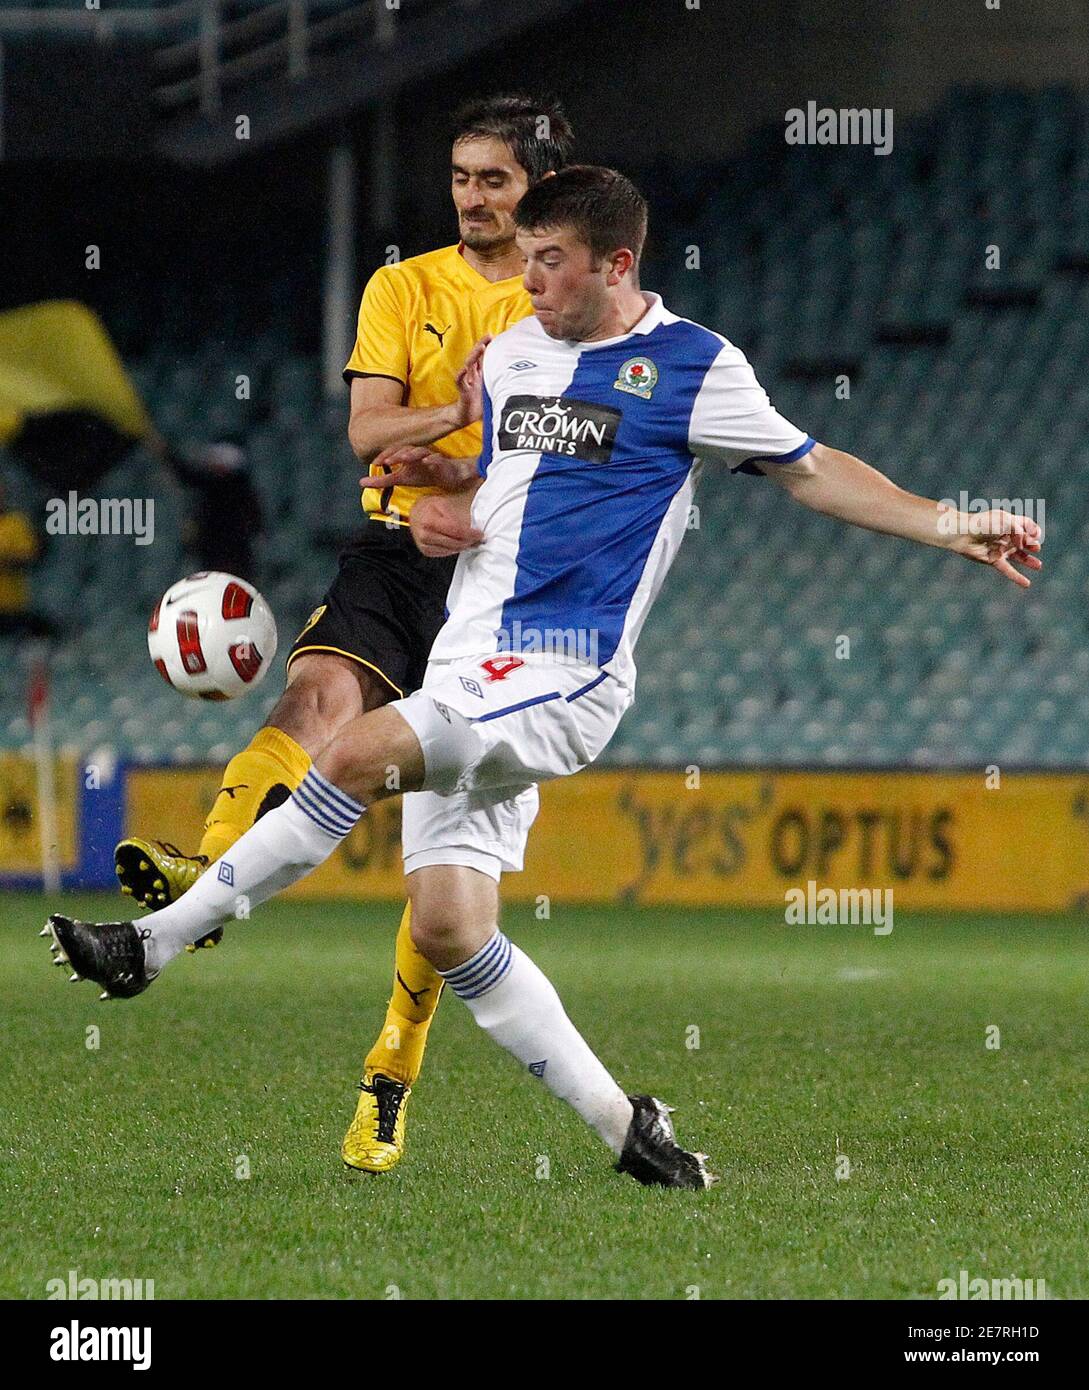 Grant Hanley (R) of Blackburn Rovers FC battles with Nikos Lyberopoulos of AEK Athens FC during their soccer match which is part of the Sydney 2010 Festival of Football at Sydney Football Stadium July 28, 2010.   REUTERS/Daniel Munoz (AUSTRALIA - Tags: SPORT SOCCER) Stock Photo